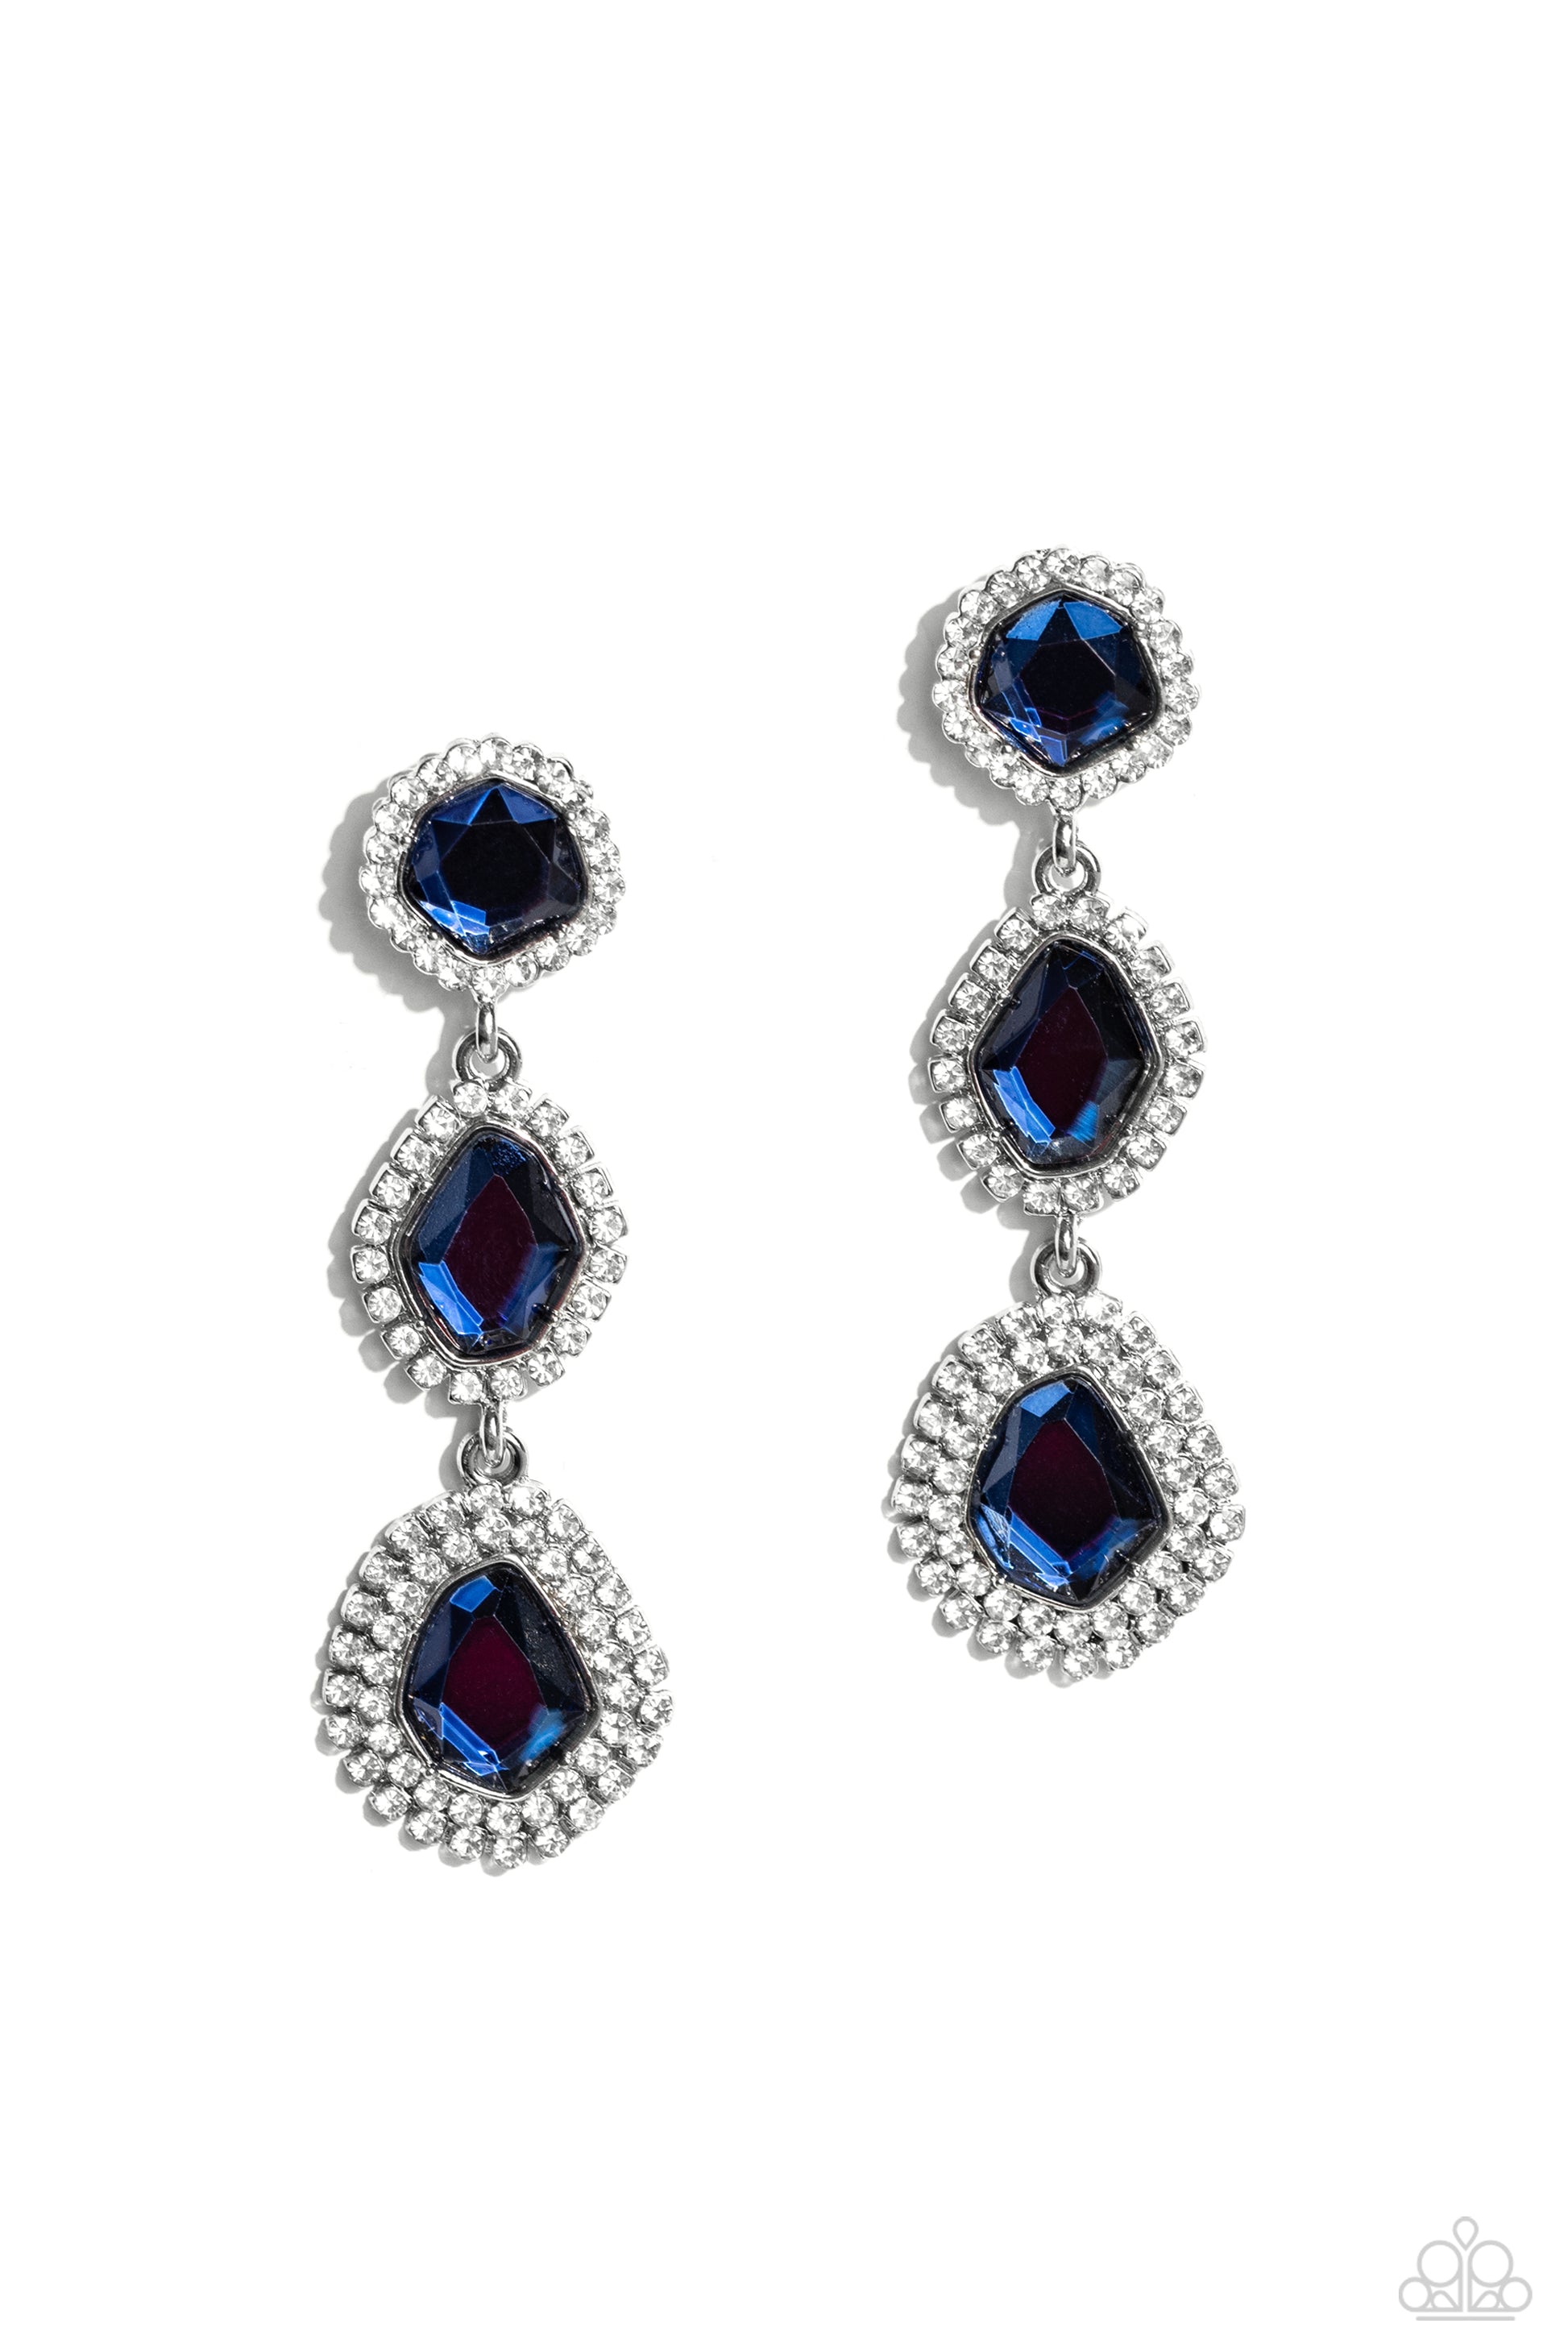  Bordered in dainty white rhinestones, a trio of imperfect Mykonos Blue gems delicately link into a dazzling lure. Earring attaches to a standard post fitting.  Sold as one pair of post earrings.